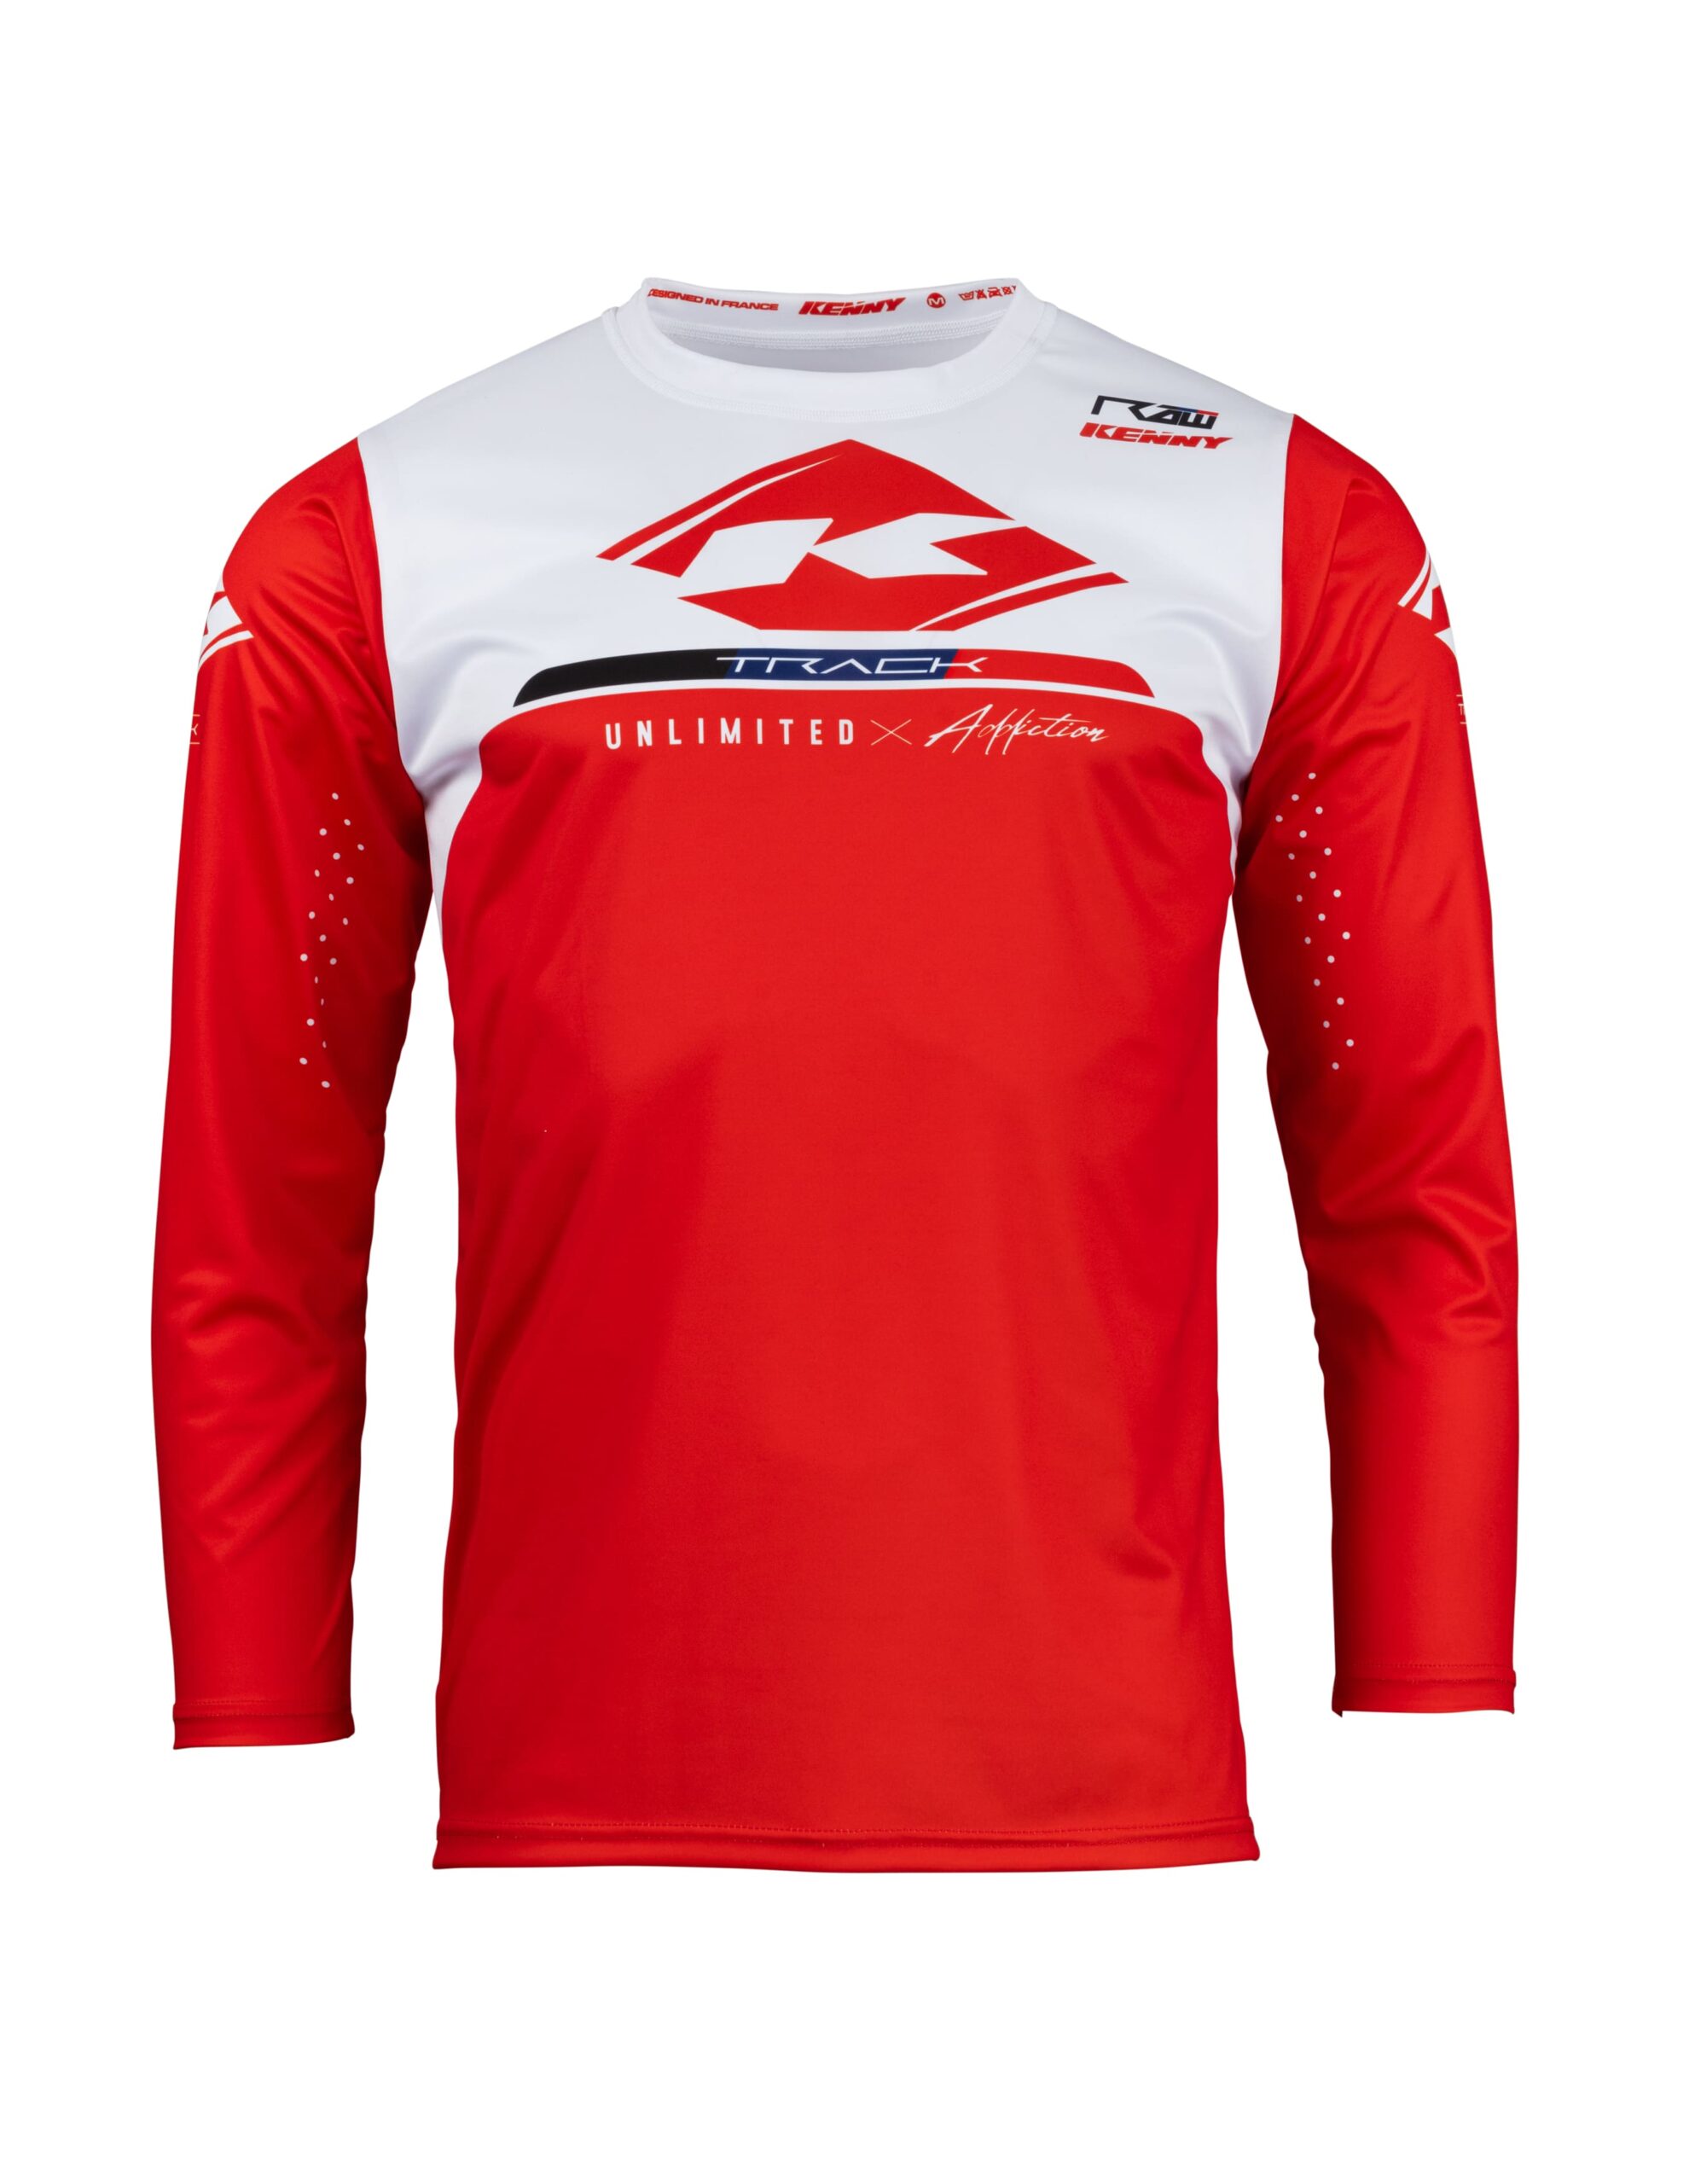 maillot_motocross_kenny_track_raw_red